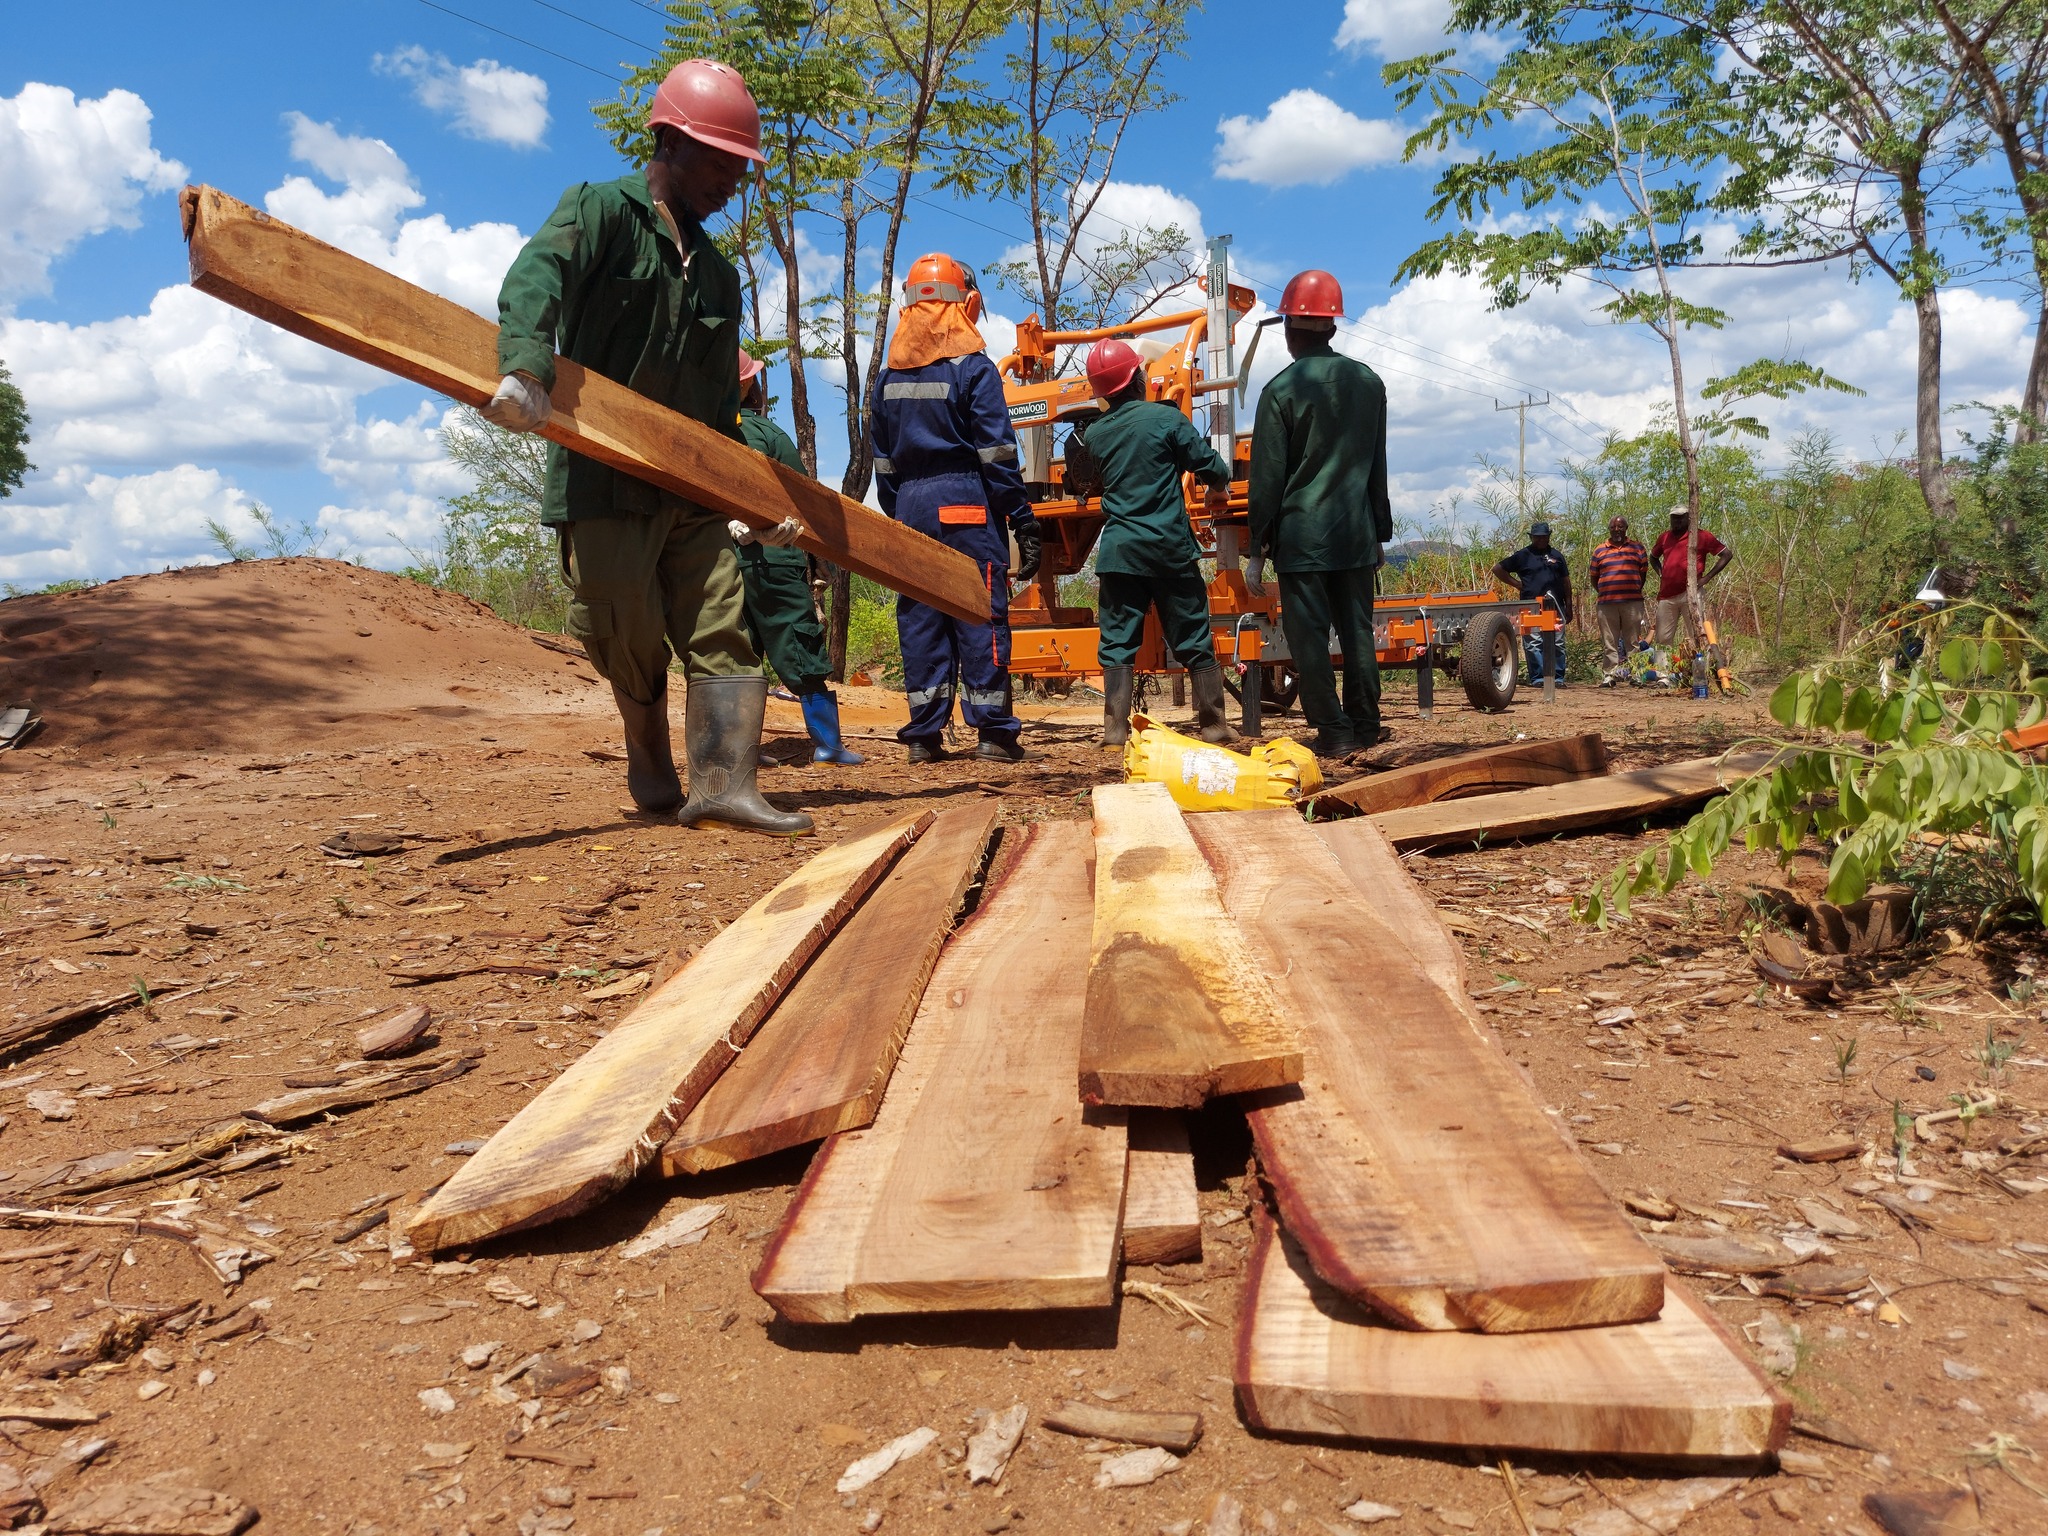 Tanzanian–Finnish collaboration supporting a ‘use it or lose it’ approach in Tanzanian Community Based Forest Management